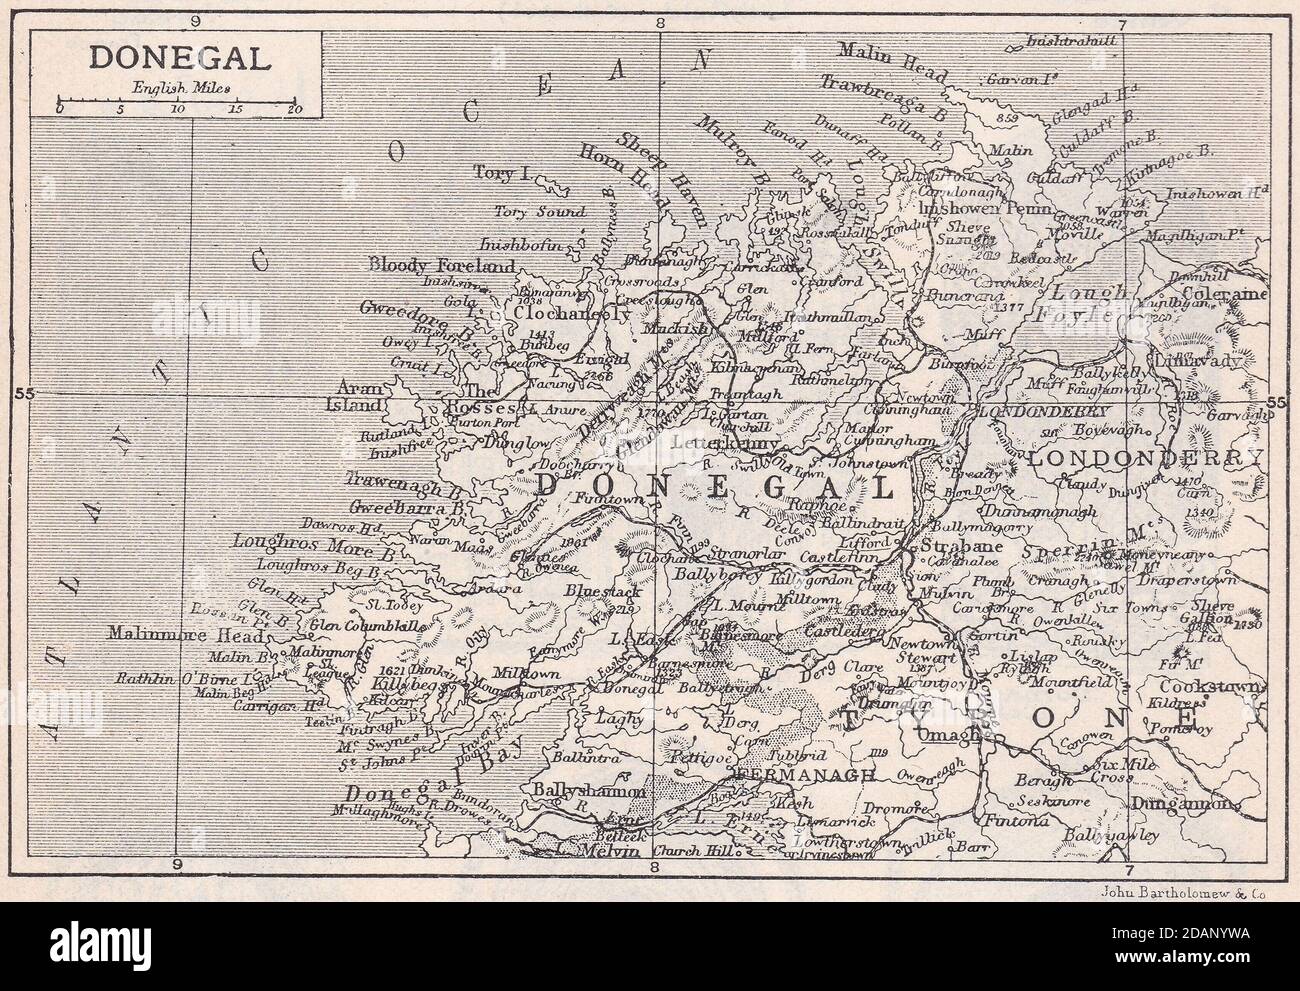 Vintage map of Donegal 1900s. Stock Photo